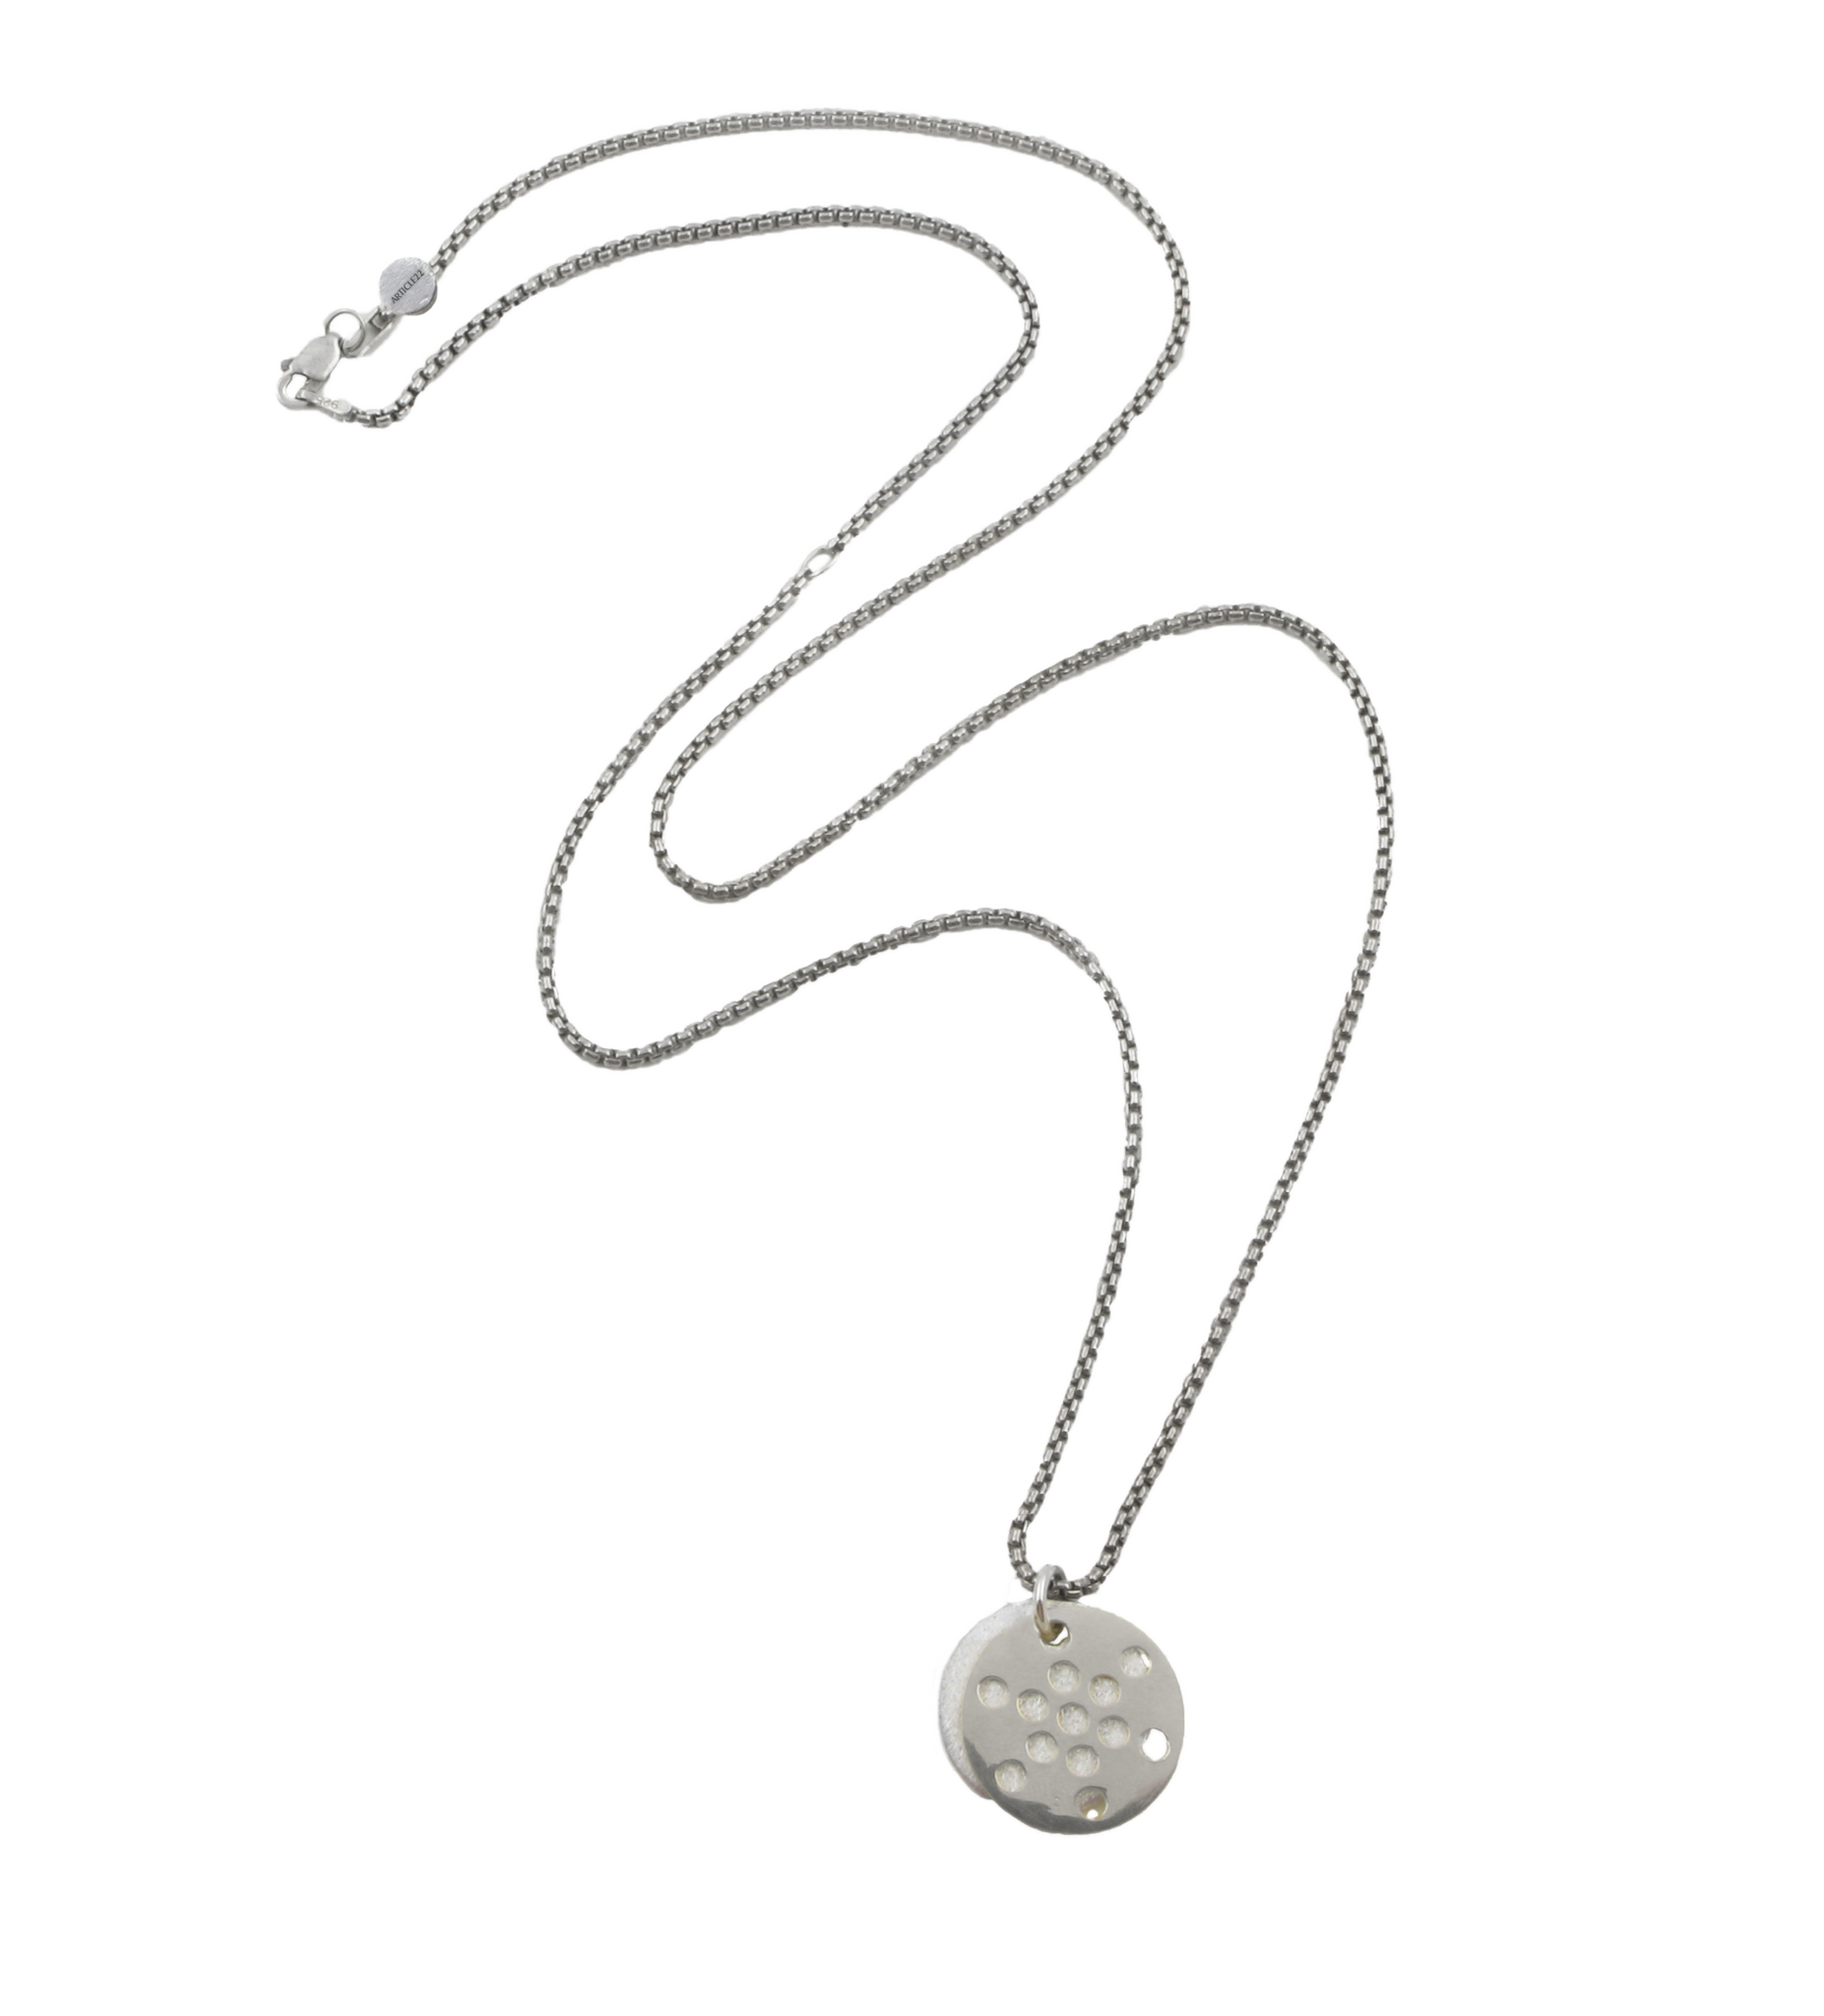 ARTICLE22 Fruit Of Life -Leo Necklace 1.9cm Jewellery | necklaces | Australian Jewellery | Jewellery Store | Jewellery shops | Online Jewellery | Gifts | Presents | Xmas Presents | Birthday Present | Wedding Gift | silver chain | Men's necklace | Army necklace | Upcycle Studio